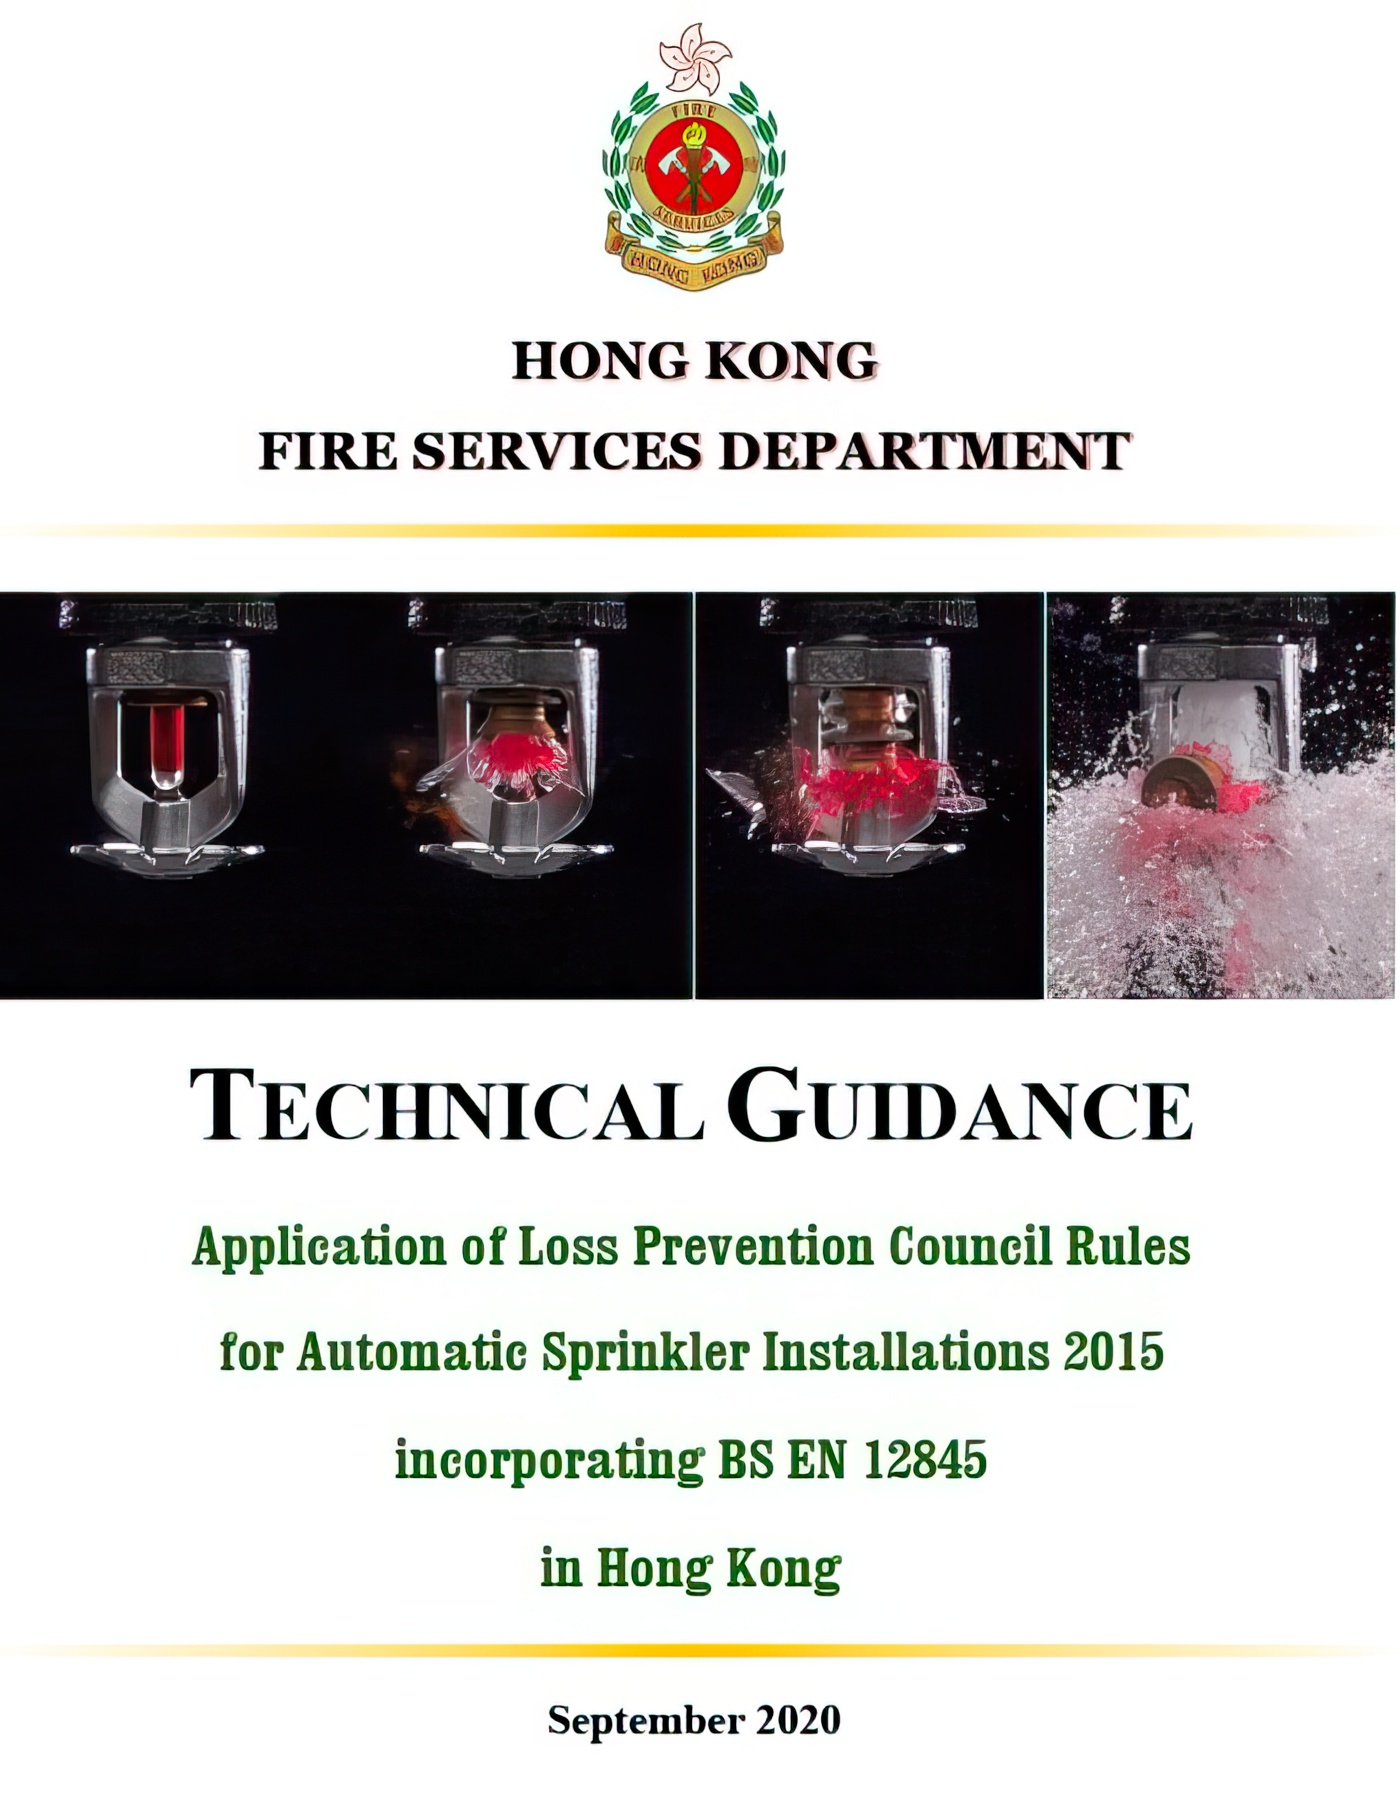 Technical Guidance Application Of Loss Prevention Councils Rules For Automatic Sprinkler Installations 2015 Photo - Application Of Loss Prevention Council Rules For Automatic Sprinkler Installations 2015 Incorporating Bs En 12845 In Hong Kong